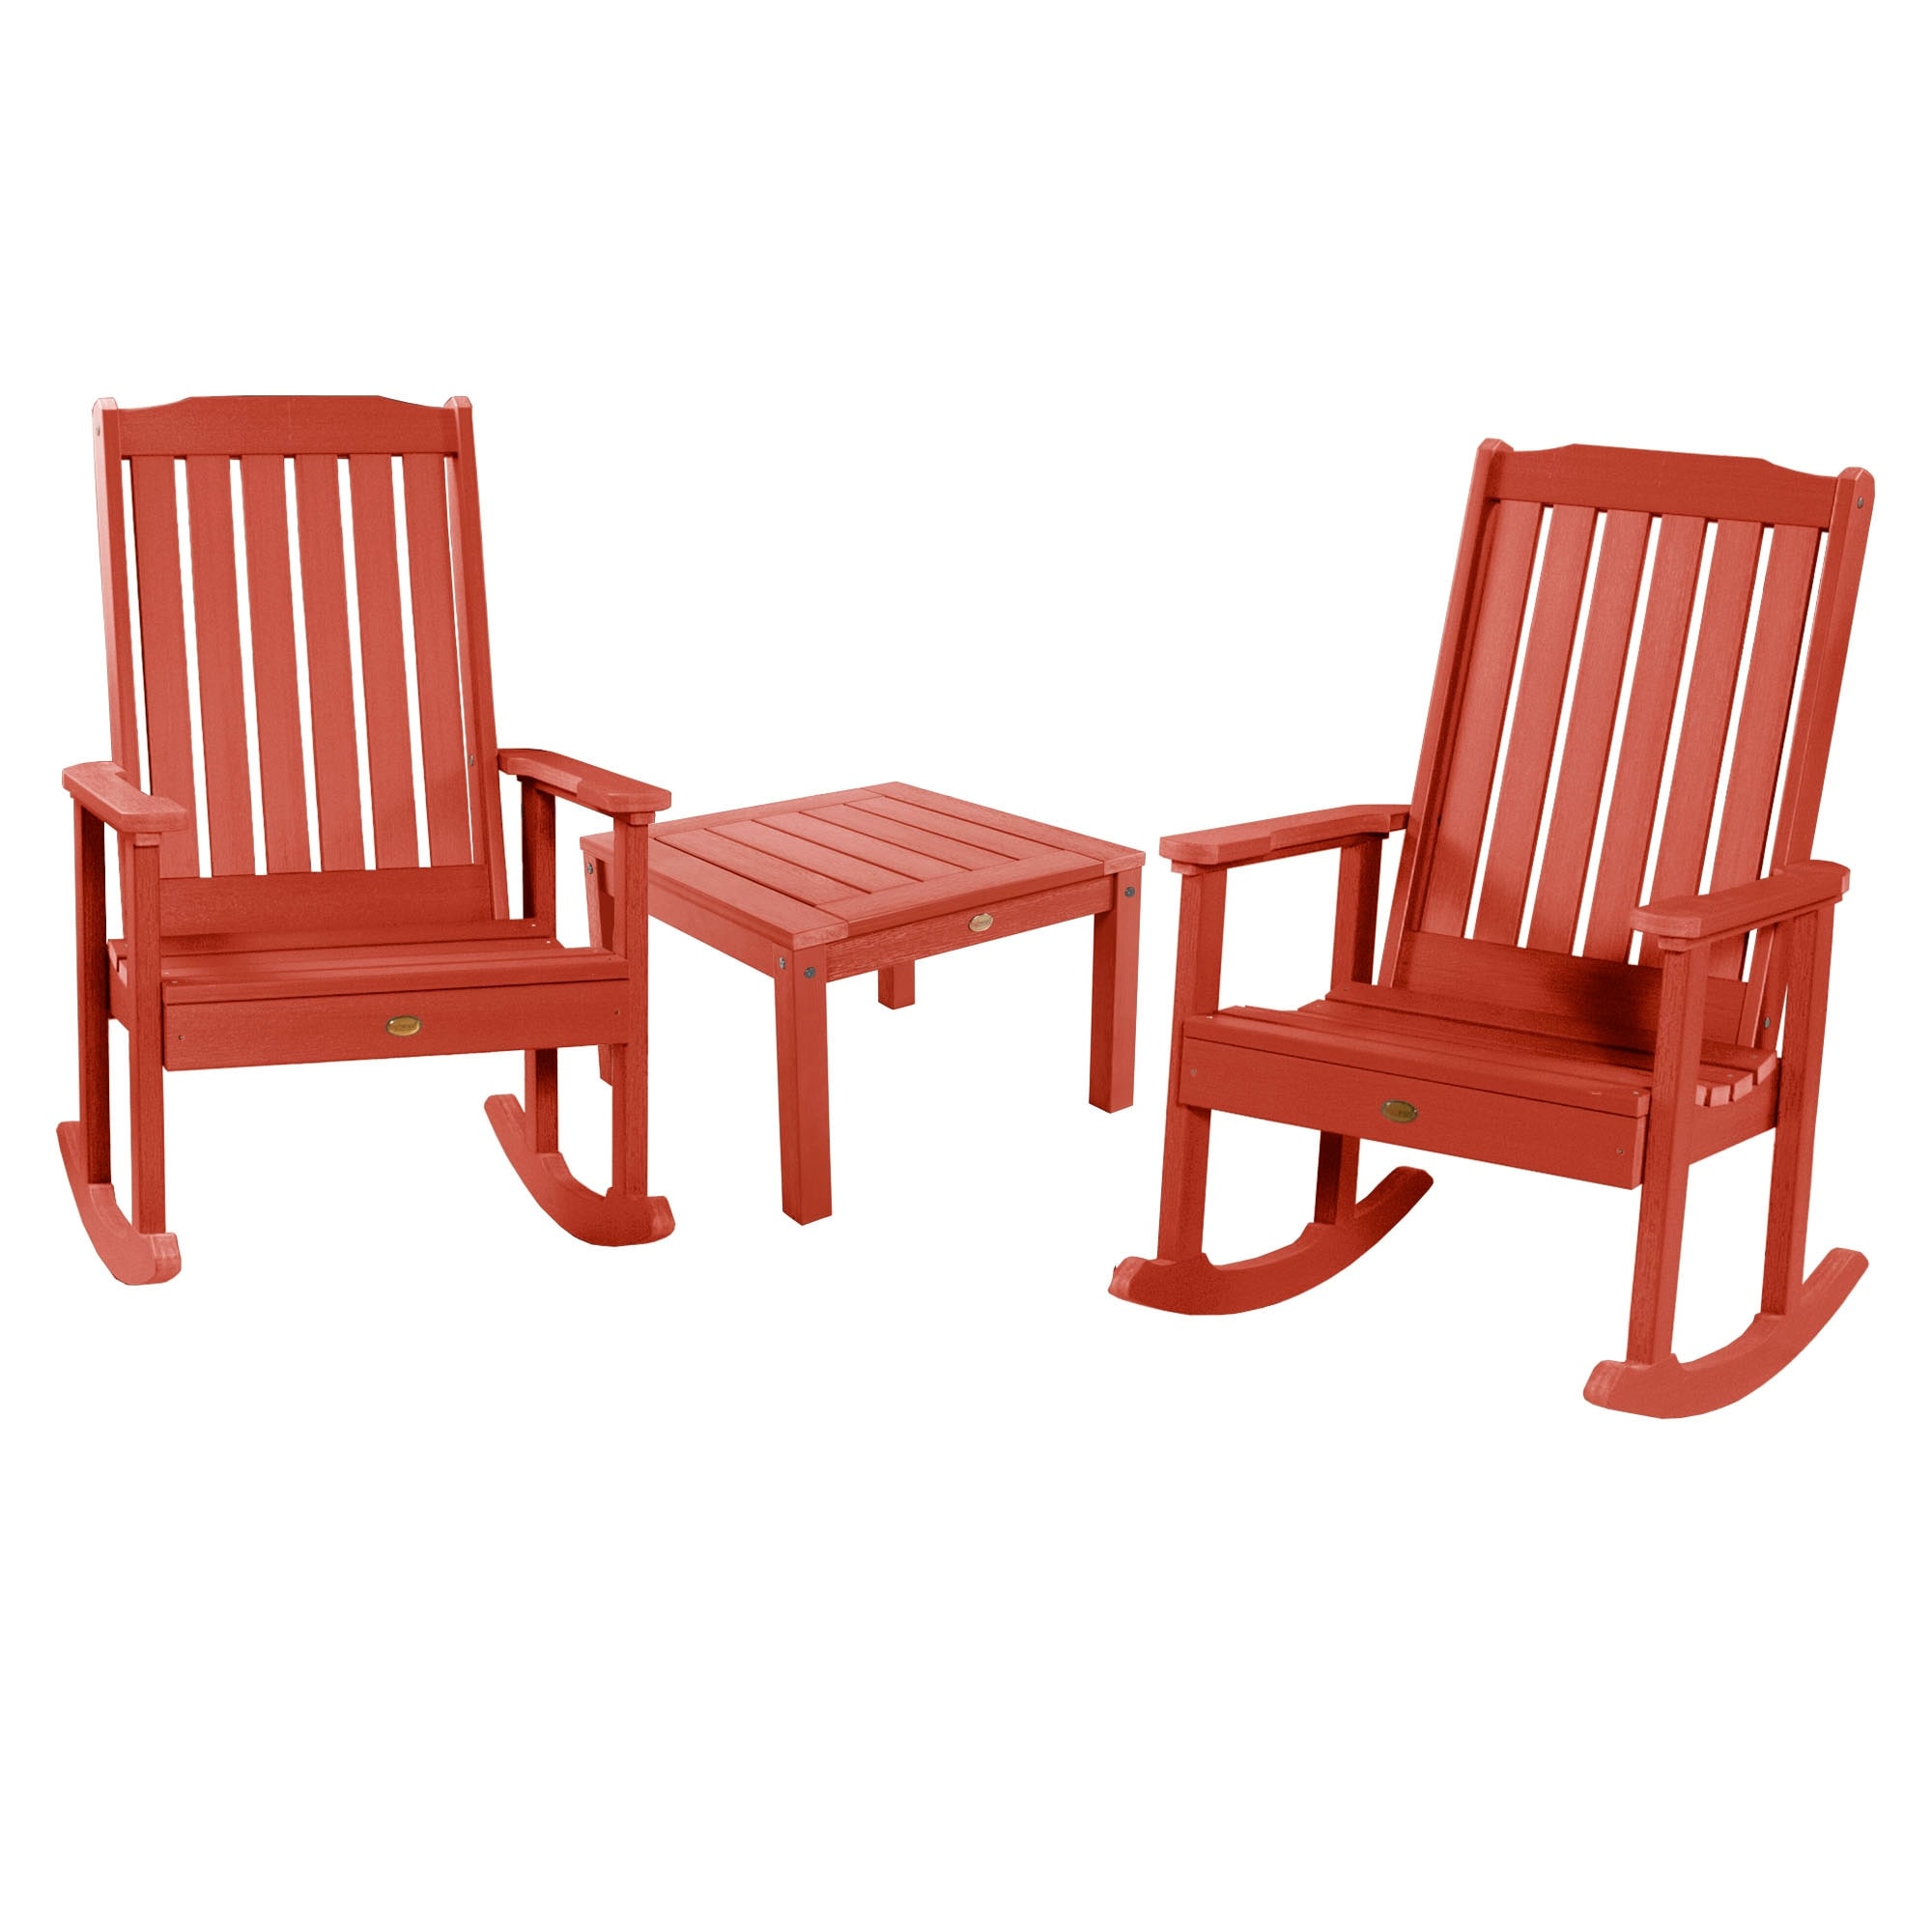 Rocking Chairs And Side Table (3-piece Set)